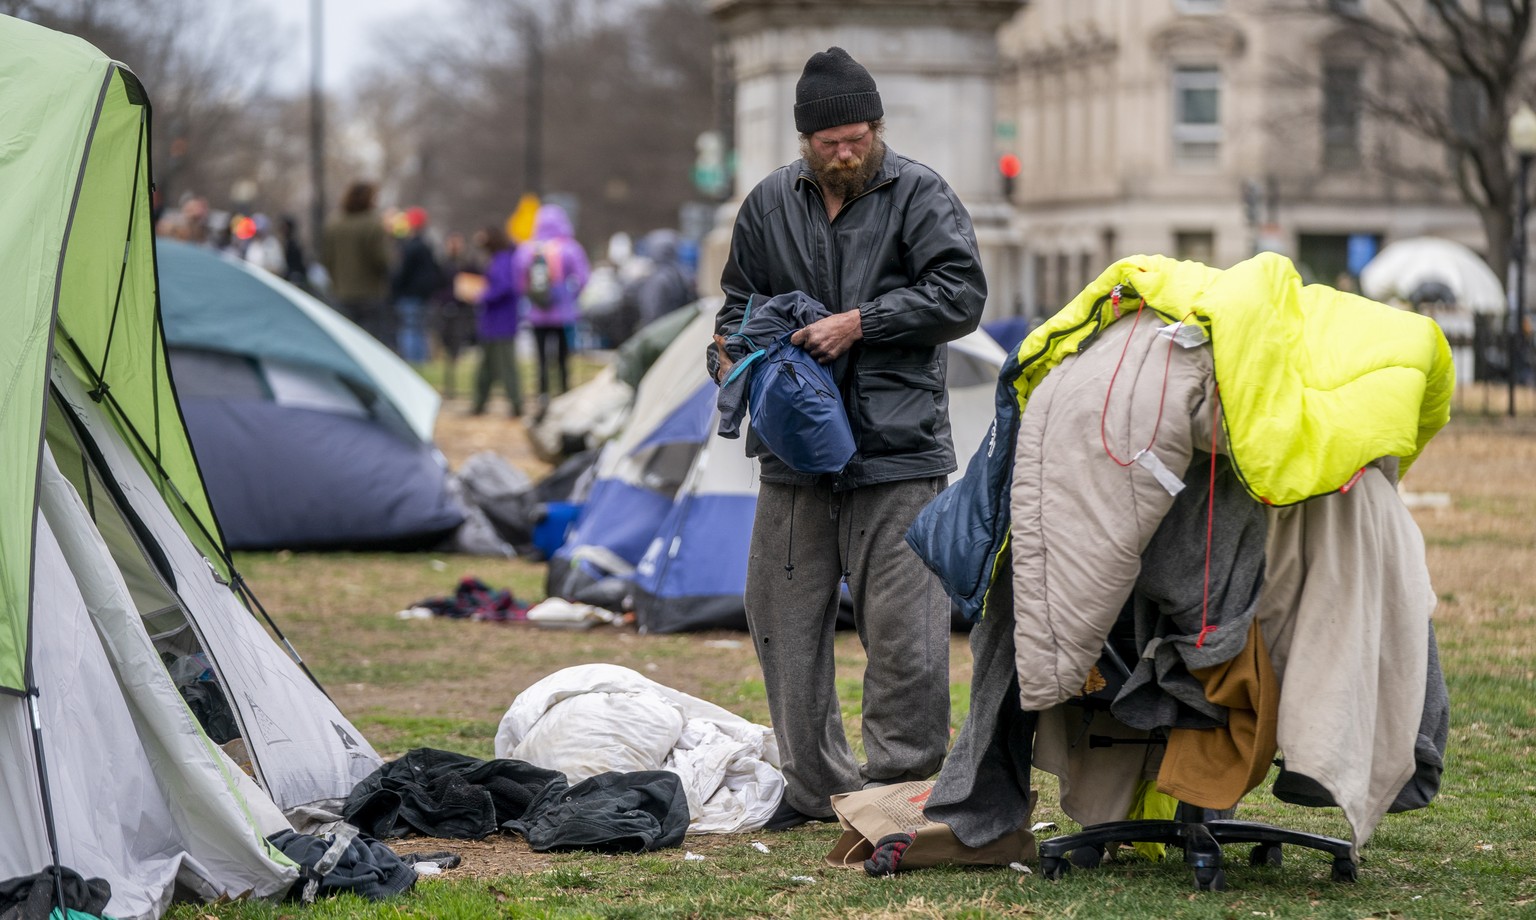 epa10468768 A homeless man packs his belongings before members of a National Park Service clean-up crew remove abandoned belongings from a homeless encampment at McPherson Square in Washington, DC, US ...